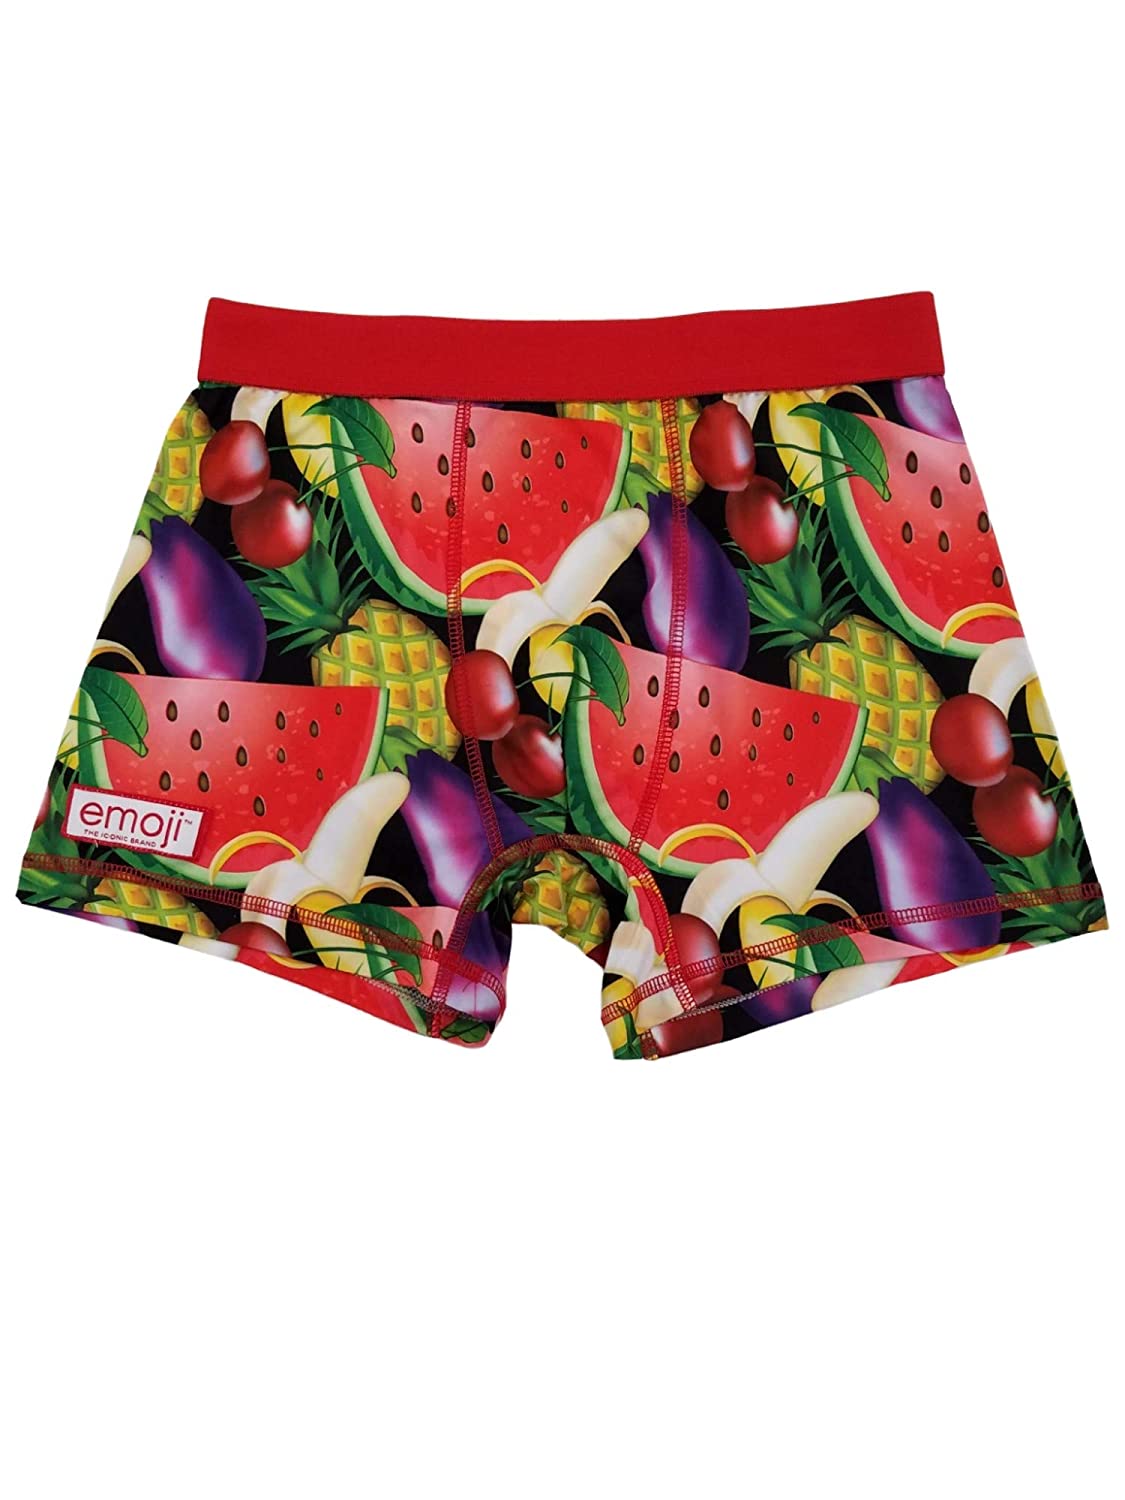 Men's Emoji Boxer Briefs Funny Fruit All Over – Rex Distributor, Inc. Wholesale Licensed Products and T-shirts, Sporting goods,